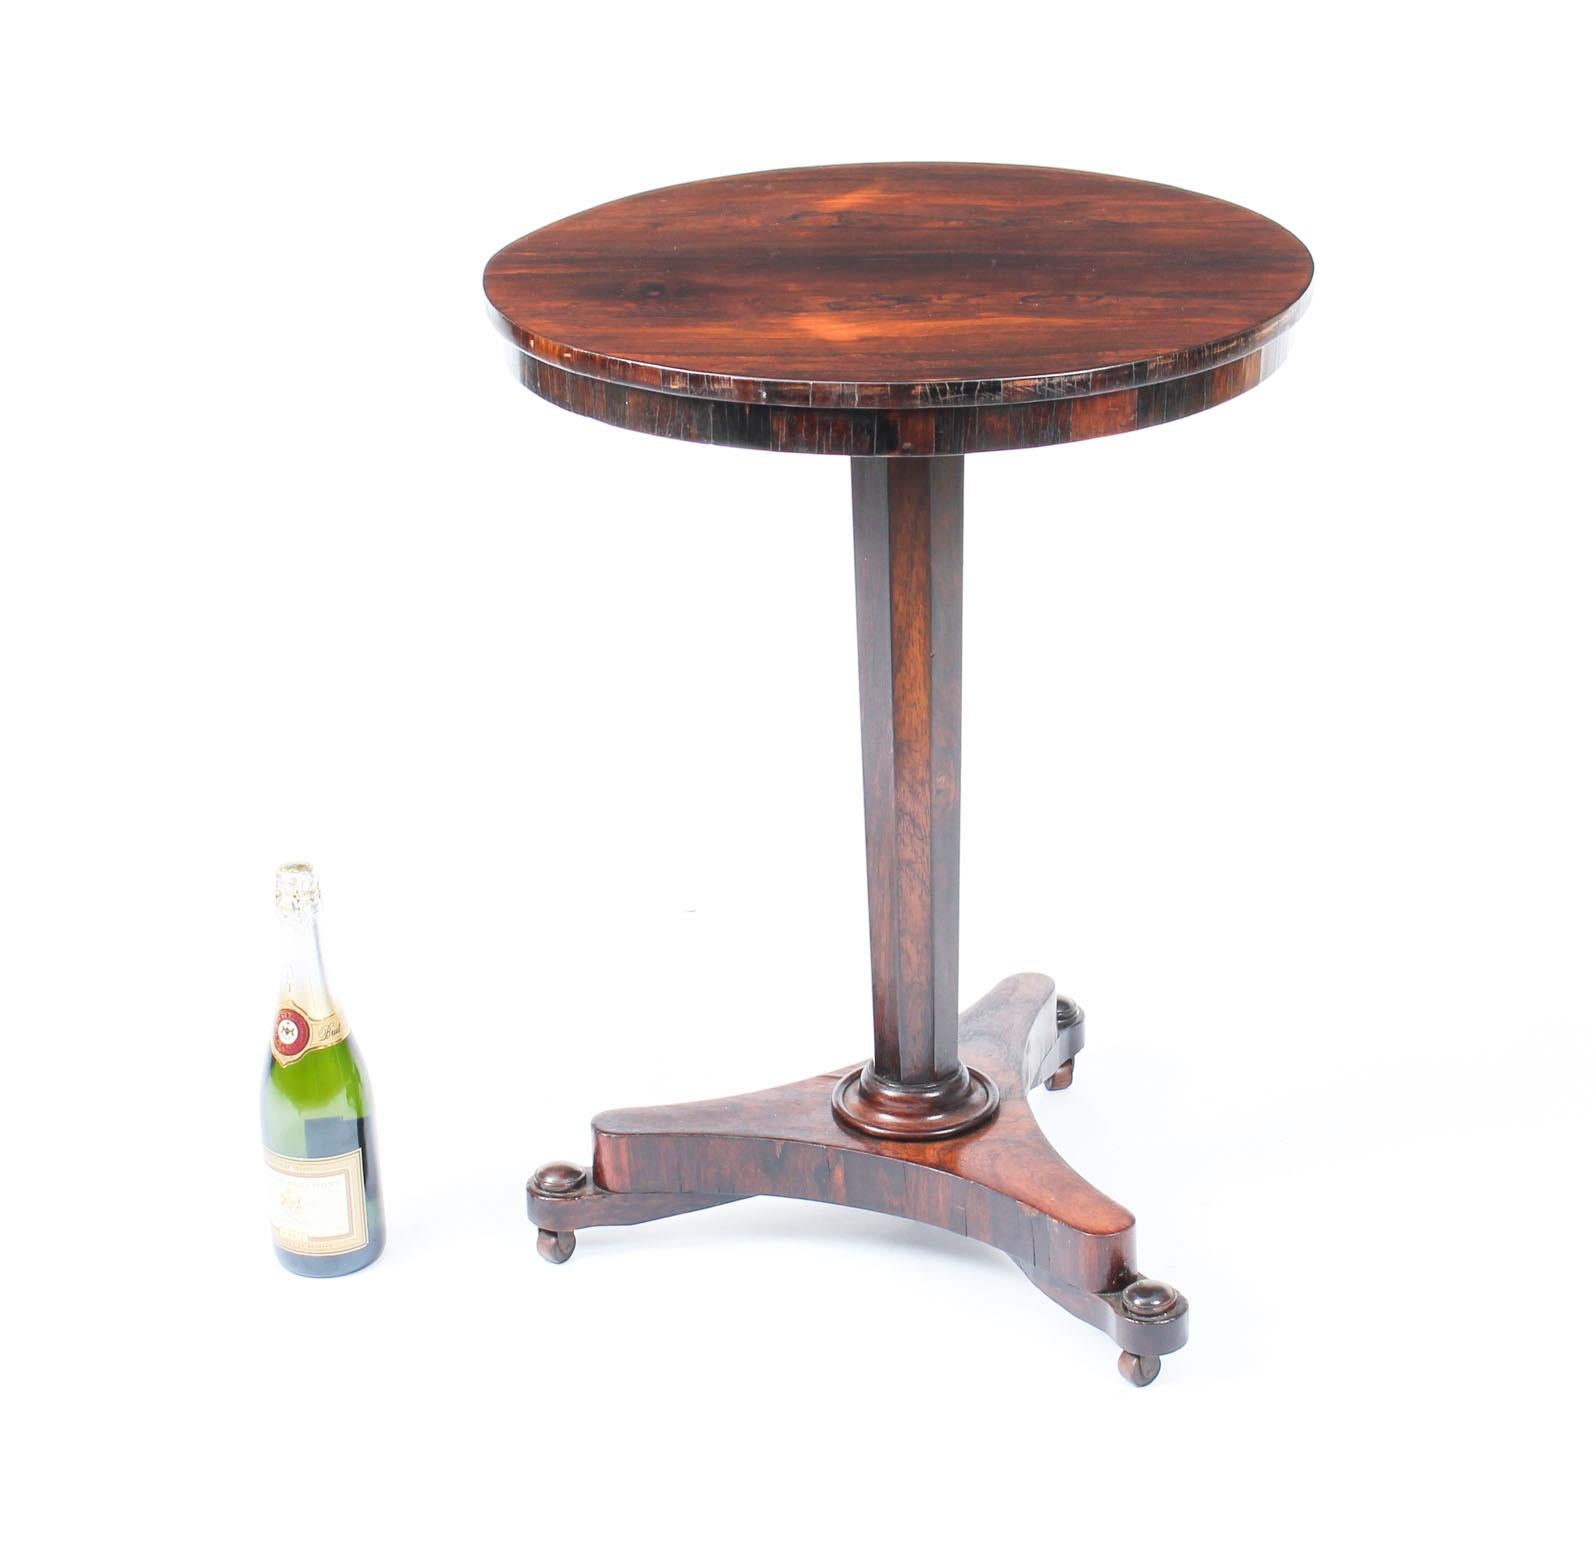 Wood Antique Regency Period Occasional Table, 19th Century